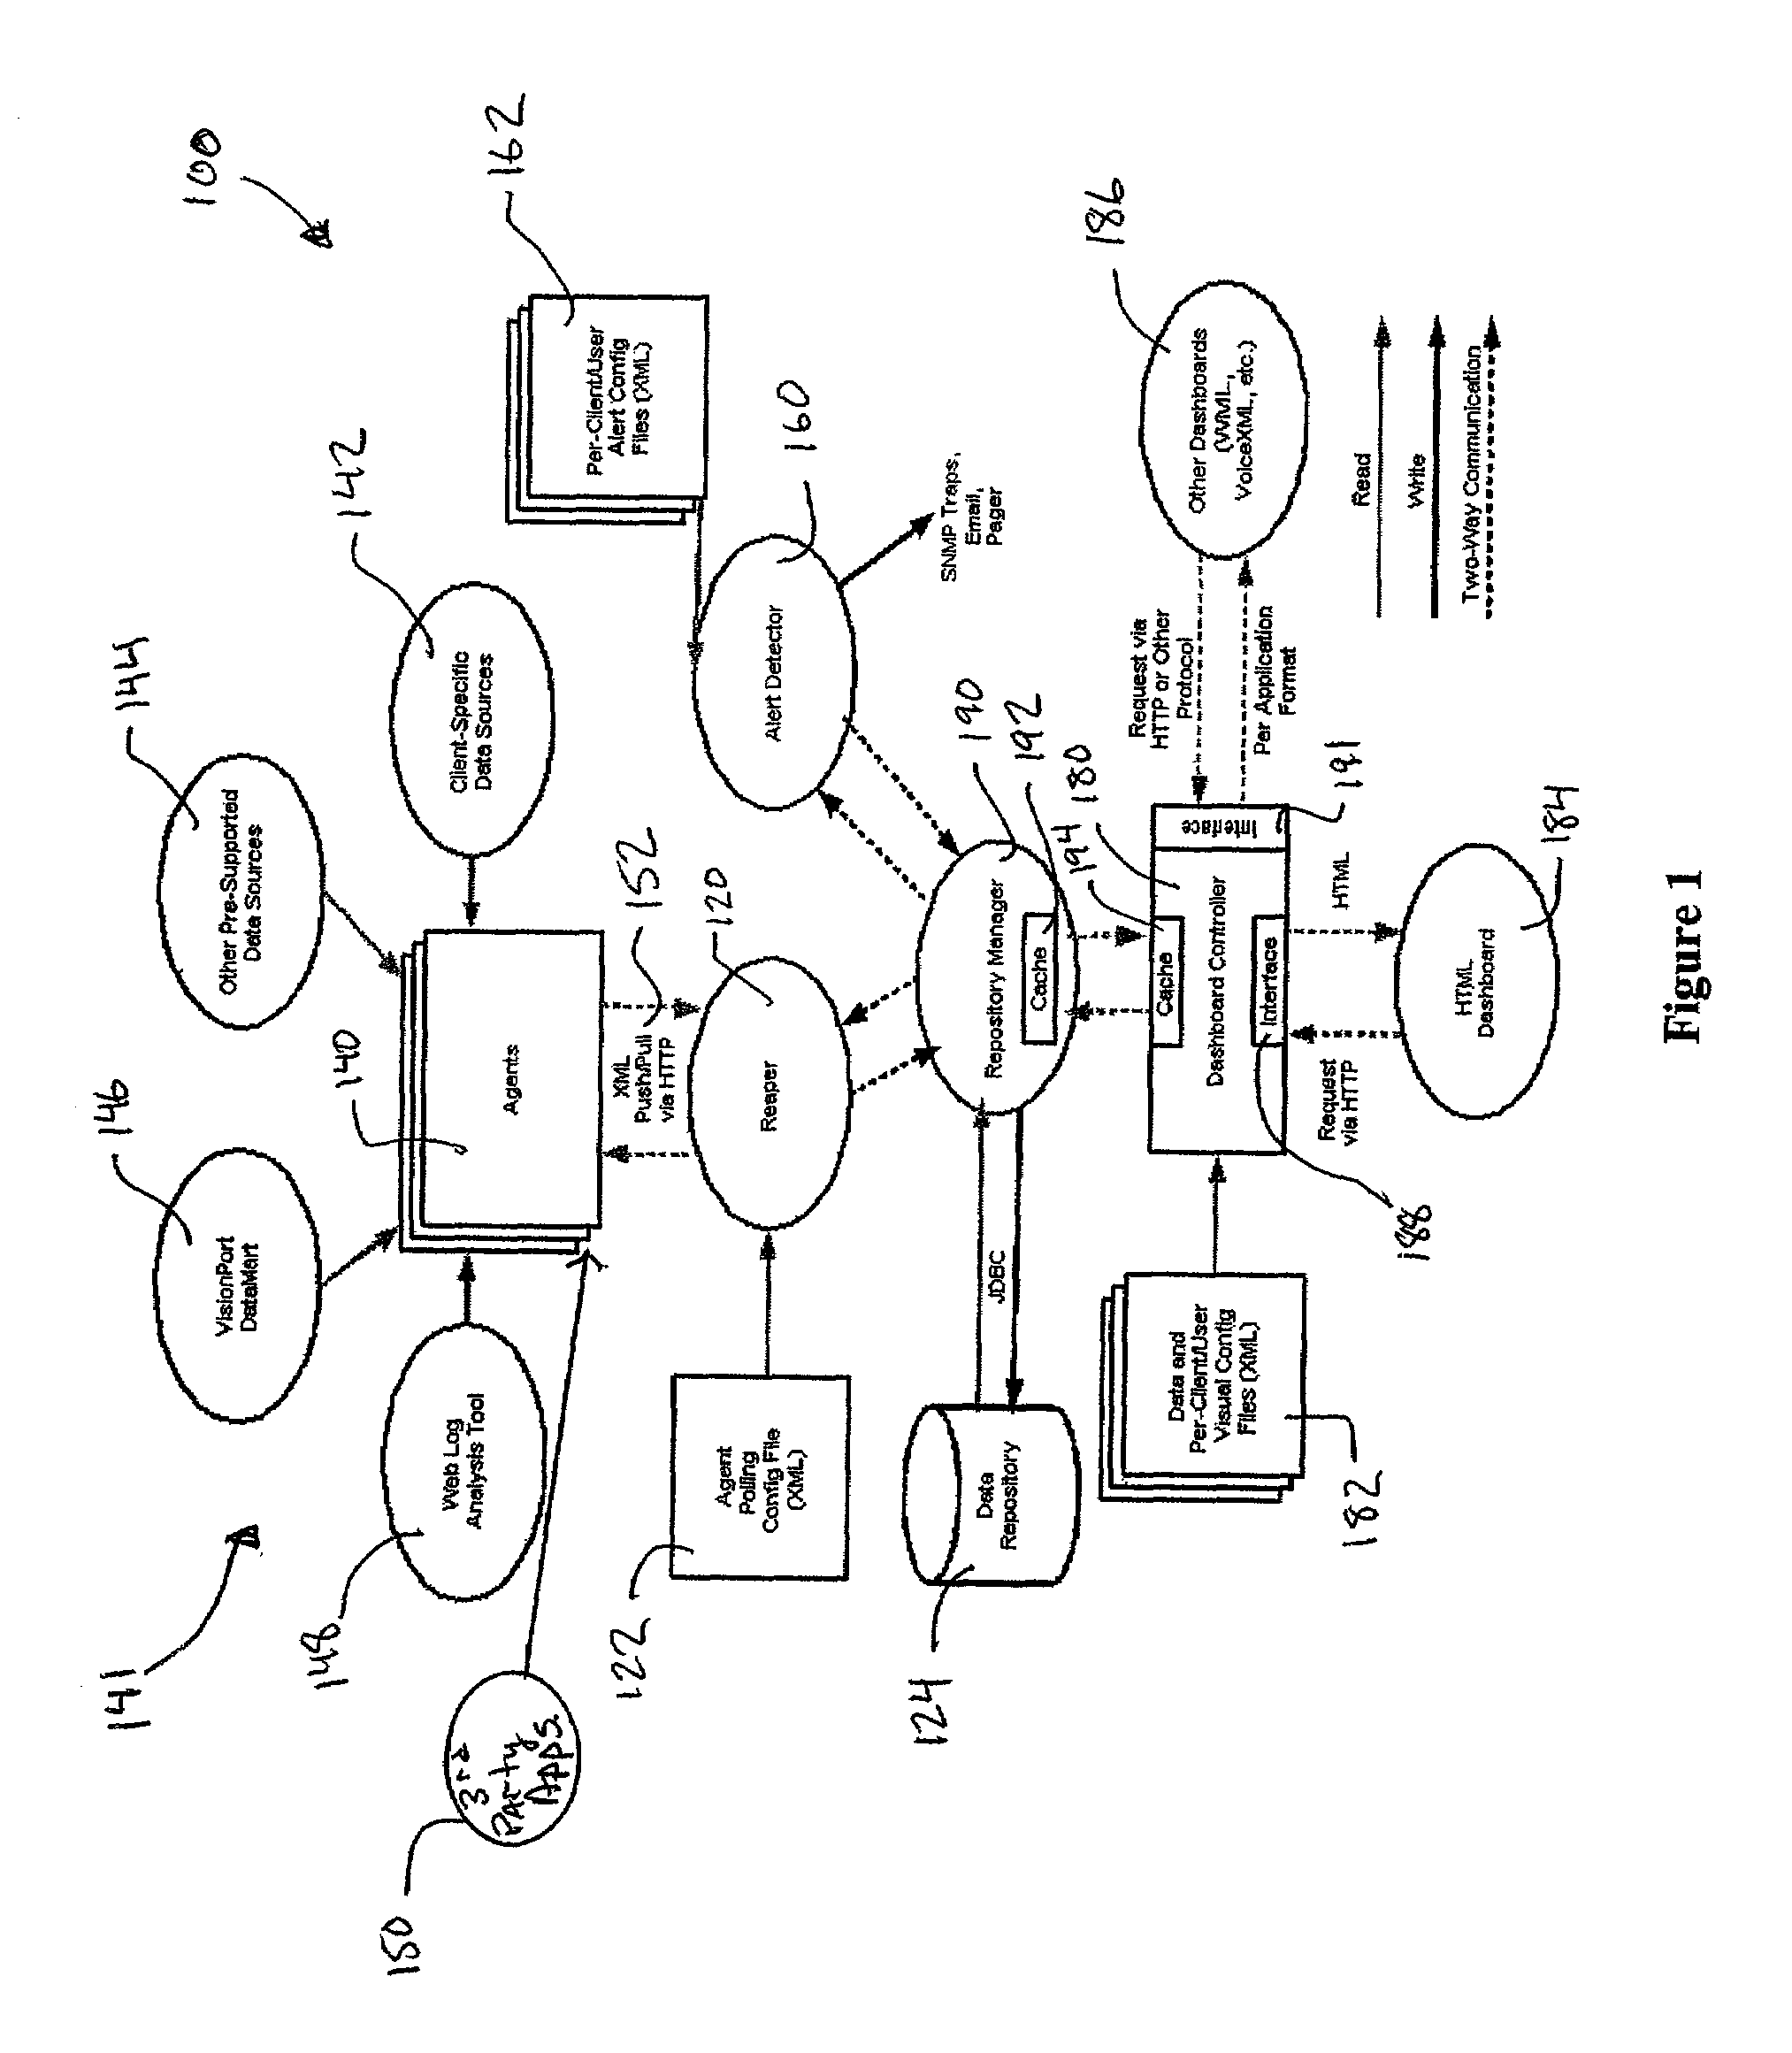 System and method for monitoring key performance indicators in a business